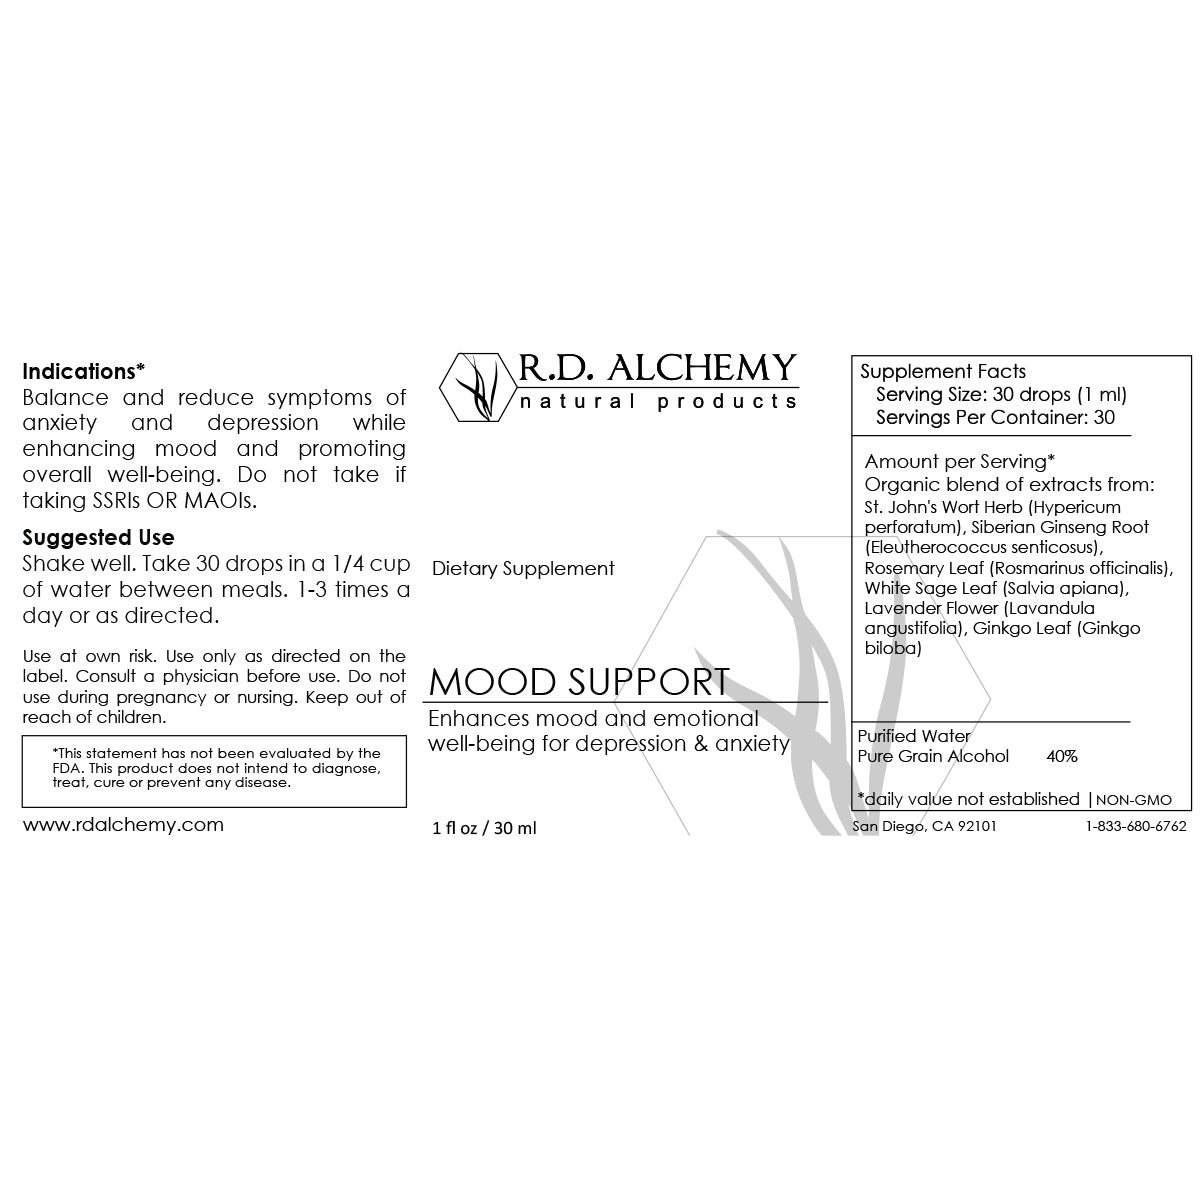 Mood Support Extract - Dietary Supplement